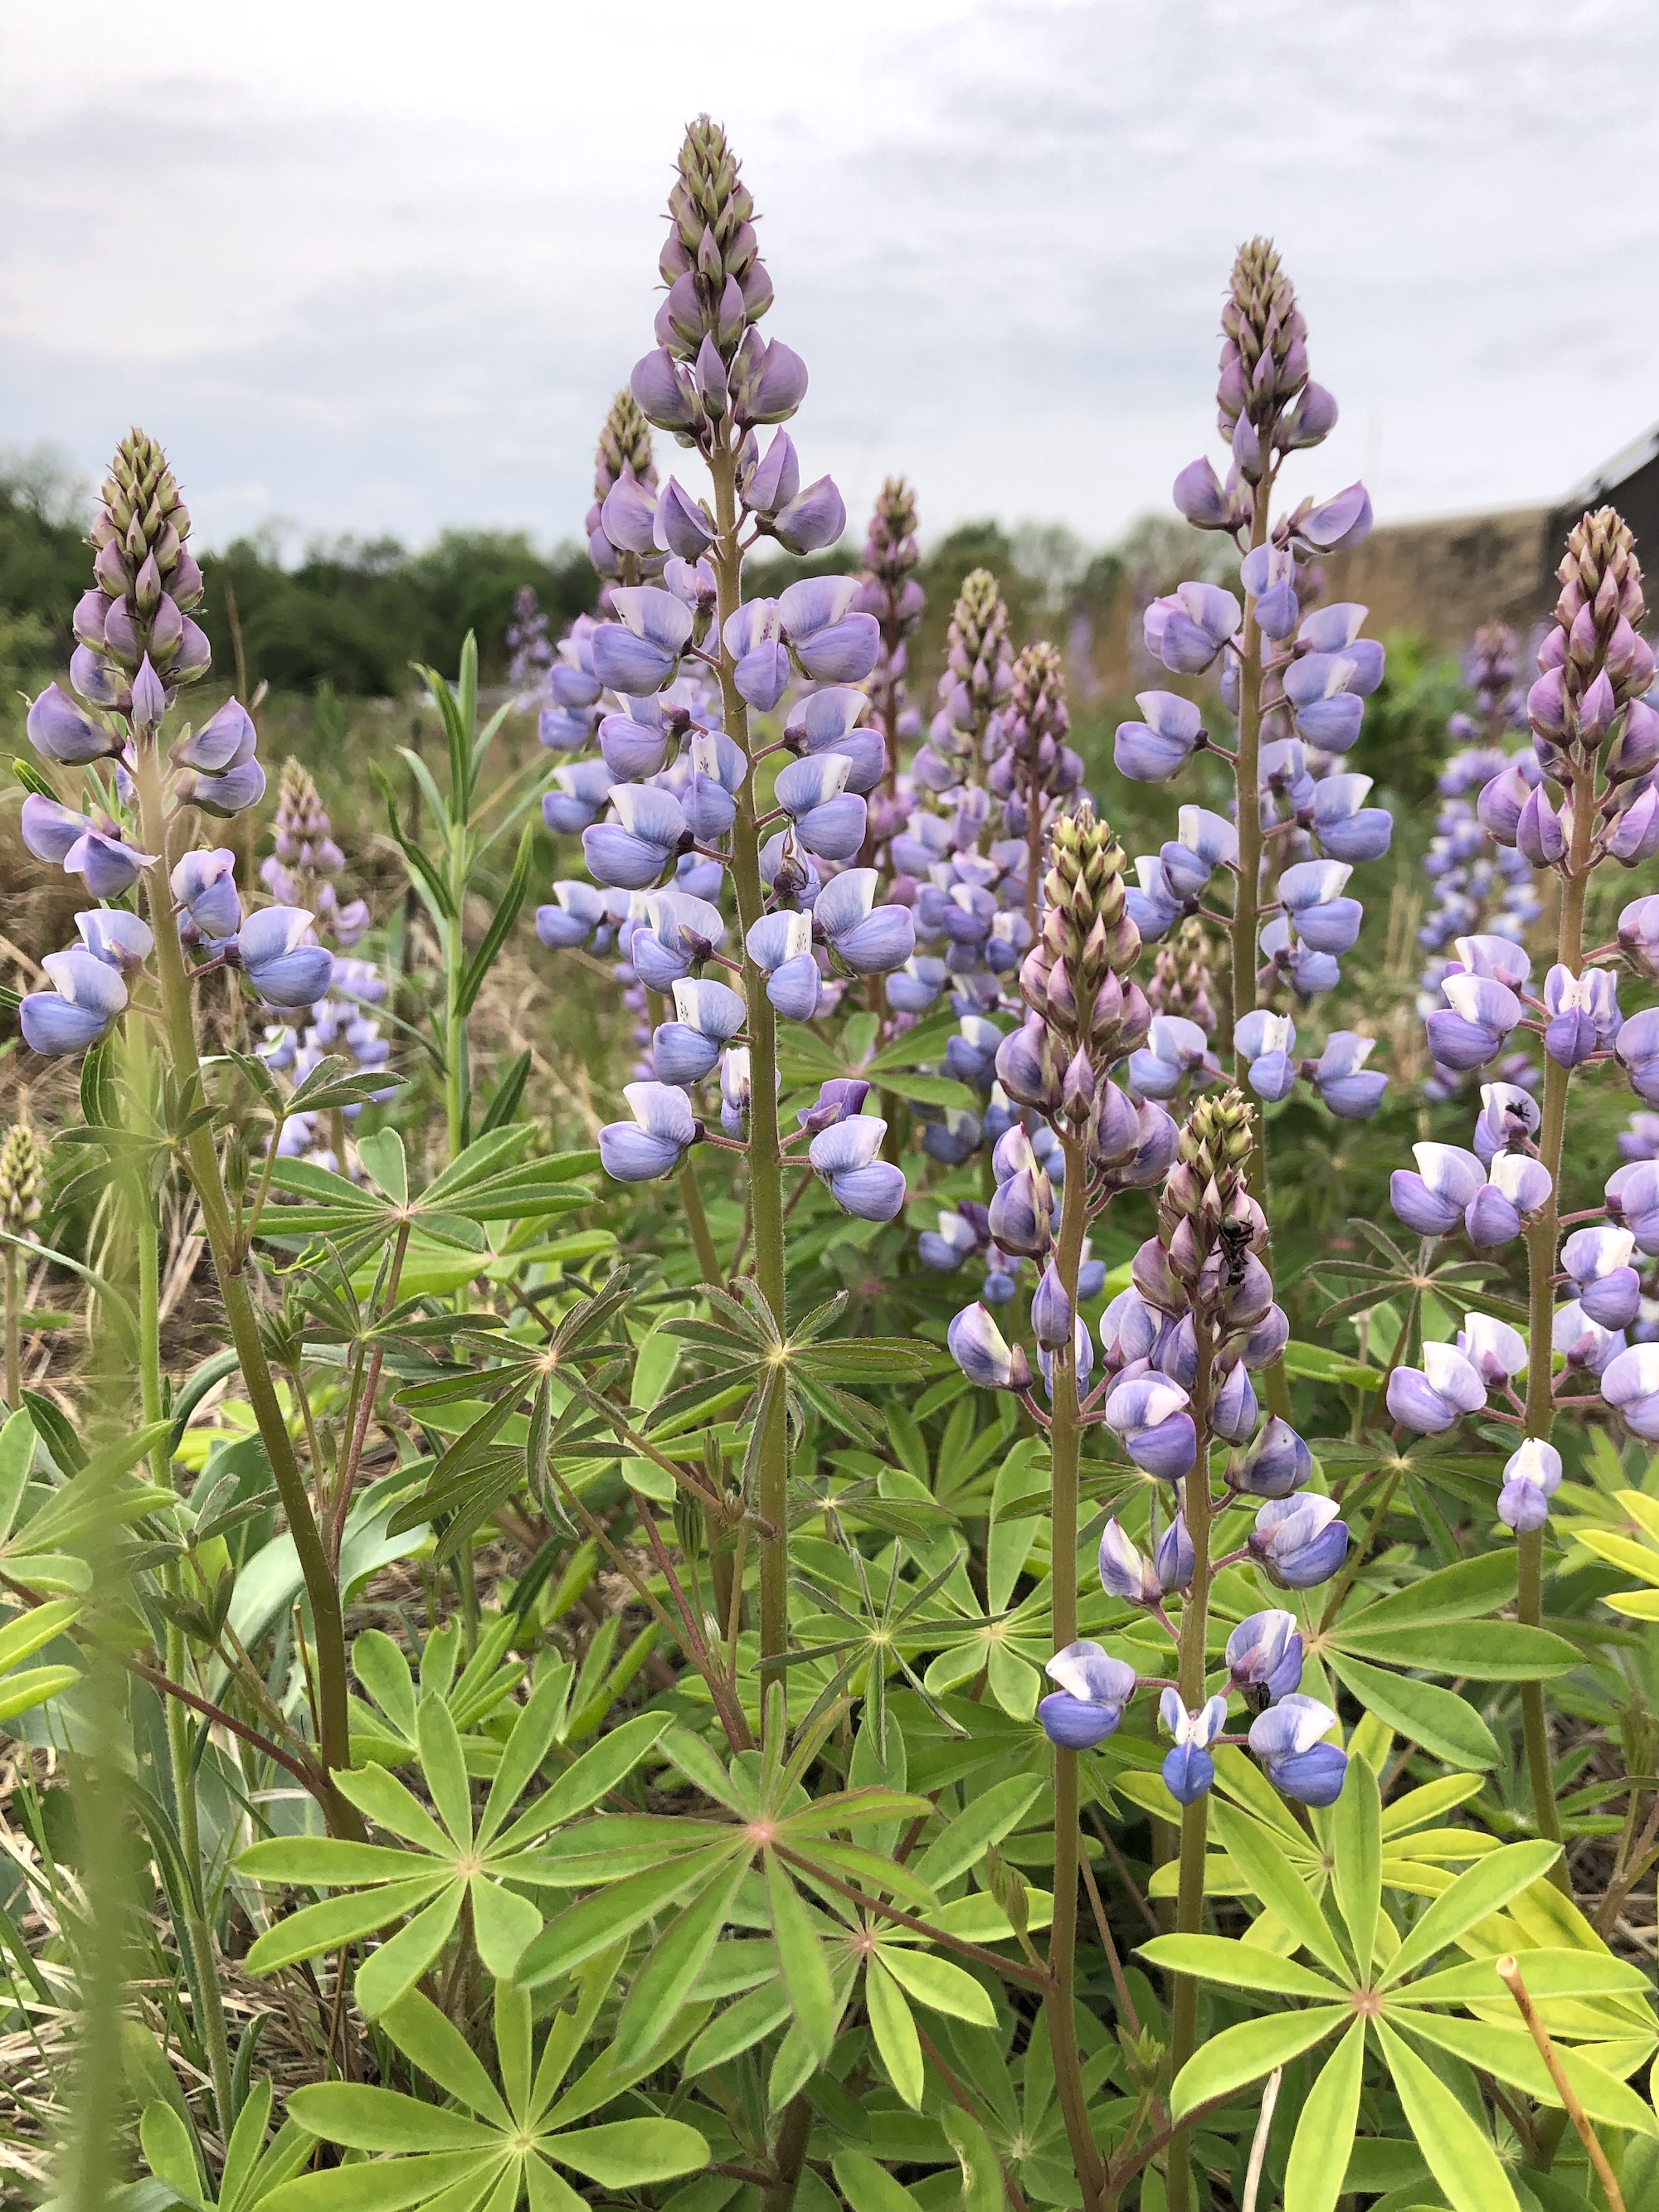 Wild Lupine next to the UW-Madison Arboretum Visitor Center in Madison, Wisconsin on May 21, 2021.